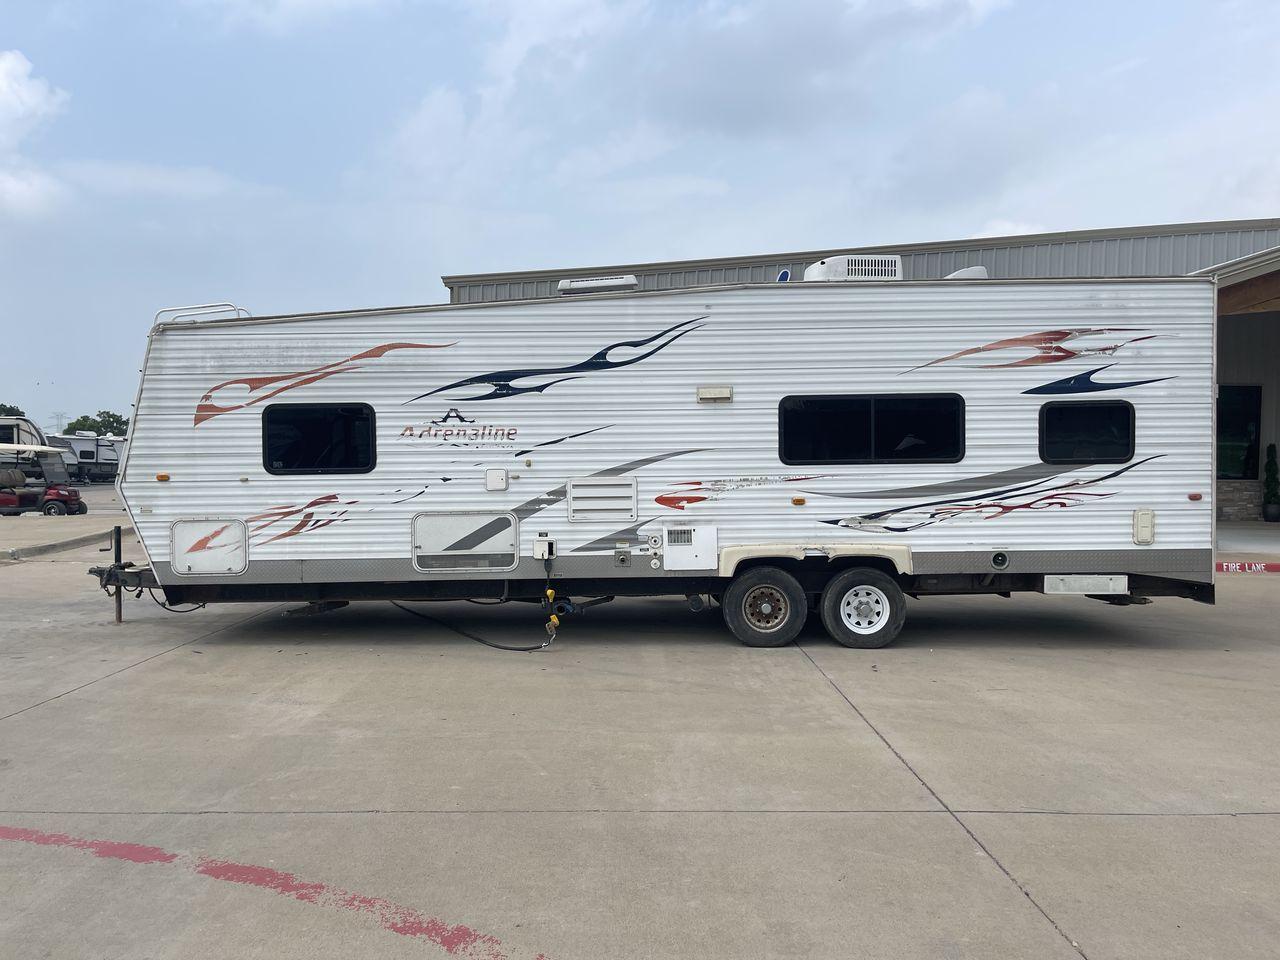 2008 WHITE ADRENALINE 23FS (1TC2B180683) , Length: 28.67 ft | Dry Weight: 6,474 lbs | Gross Weight: 9,500 lbs | Slides: 9 transmission, located at 4319 N Main Street, Cleburne, TX, 76033, (817) 221-0660, 32.435829, -97.384178 - The 2008 Adrenaline 23FS Toy Hauler is prepared for a journey! It is 28.67 feet long and weighs 6,474 pounds when dry. It's lightweight and portable, but large enough to hold all of your favorite toys and accessories. It can accommodate up to 9,500 pounds, so you'll have plenty of room for your next - Photo #24